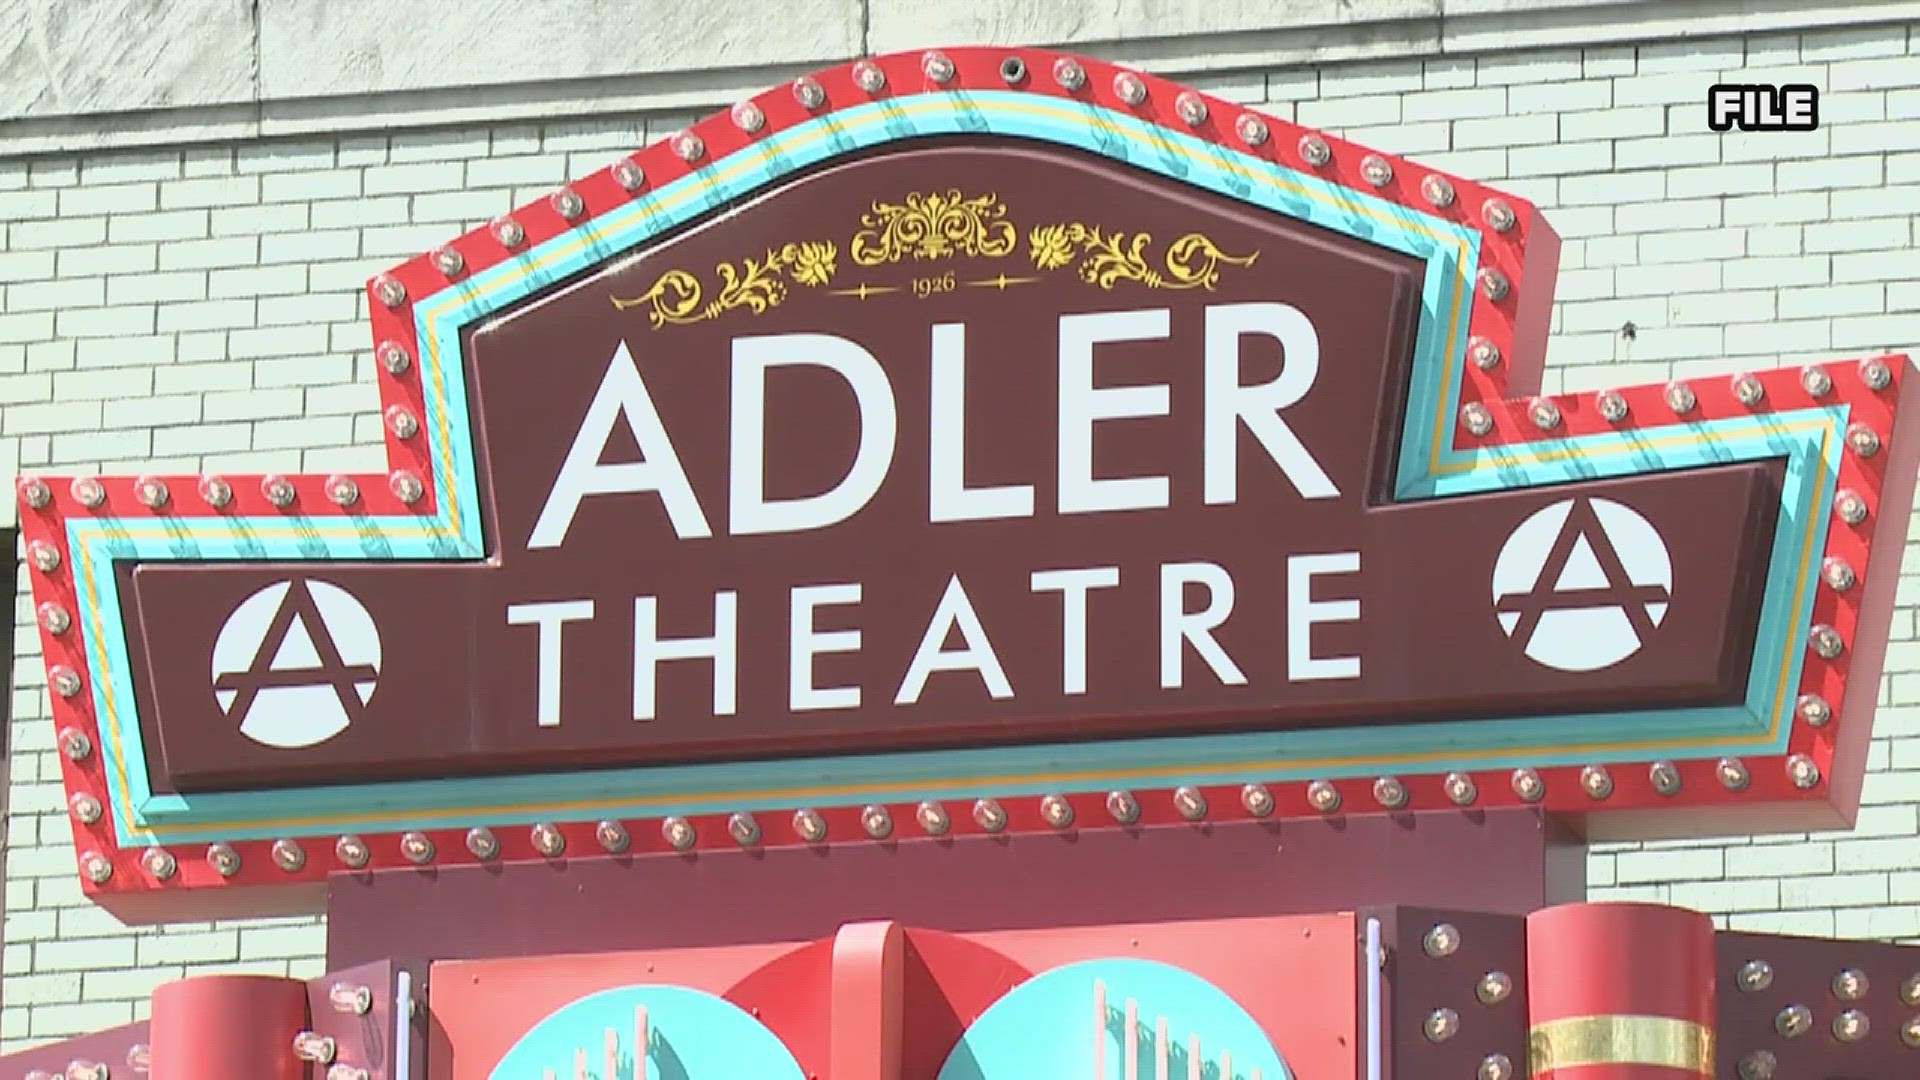 The Adler says it has seen more invalid and fraudulent tickets presented at events, costing some ticketholders hundreds of dollars.